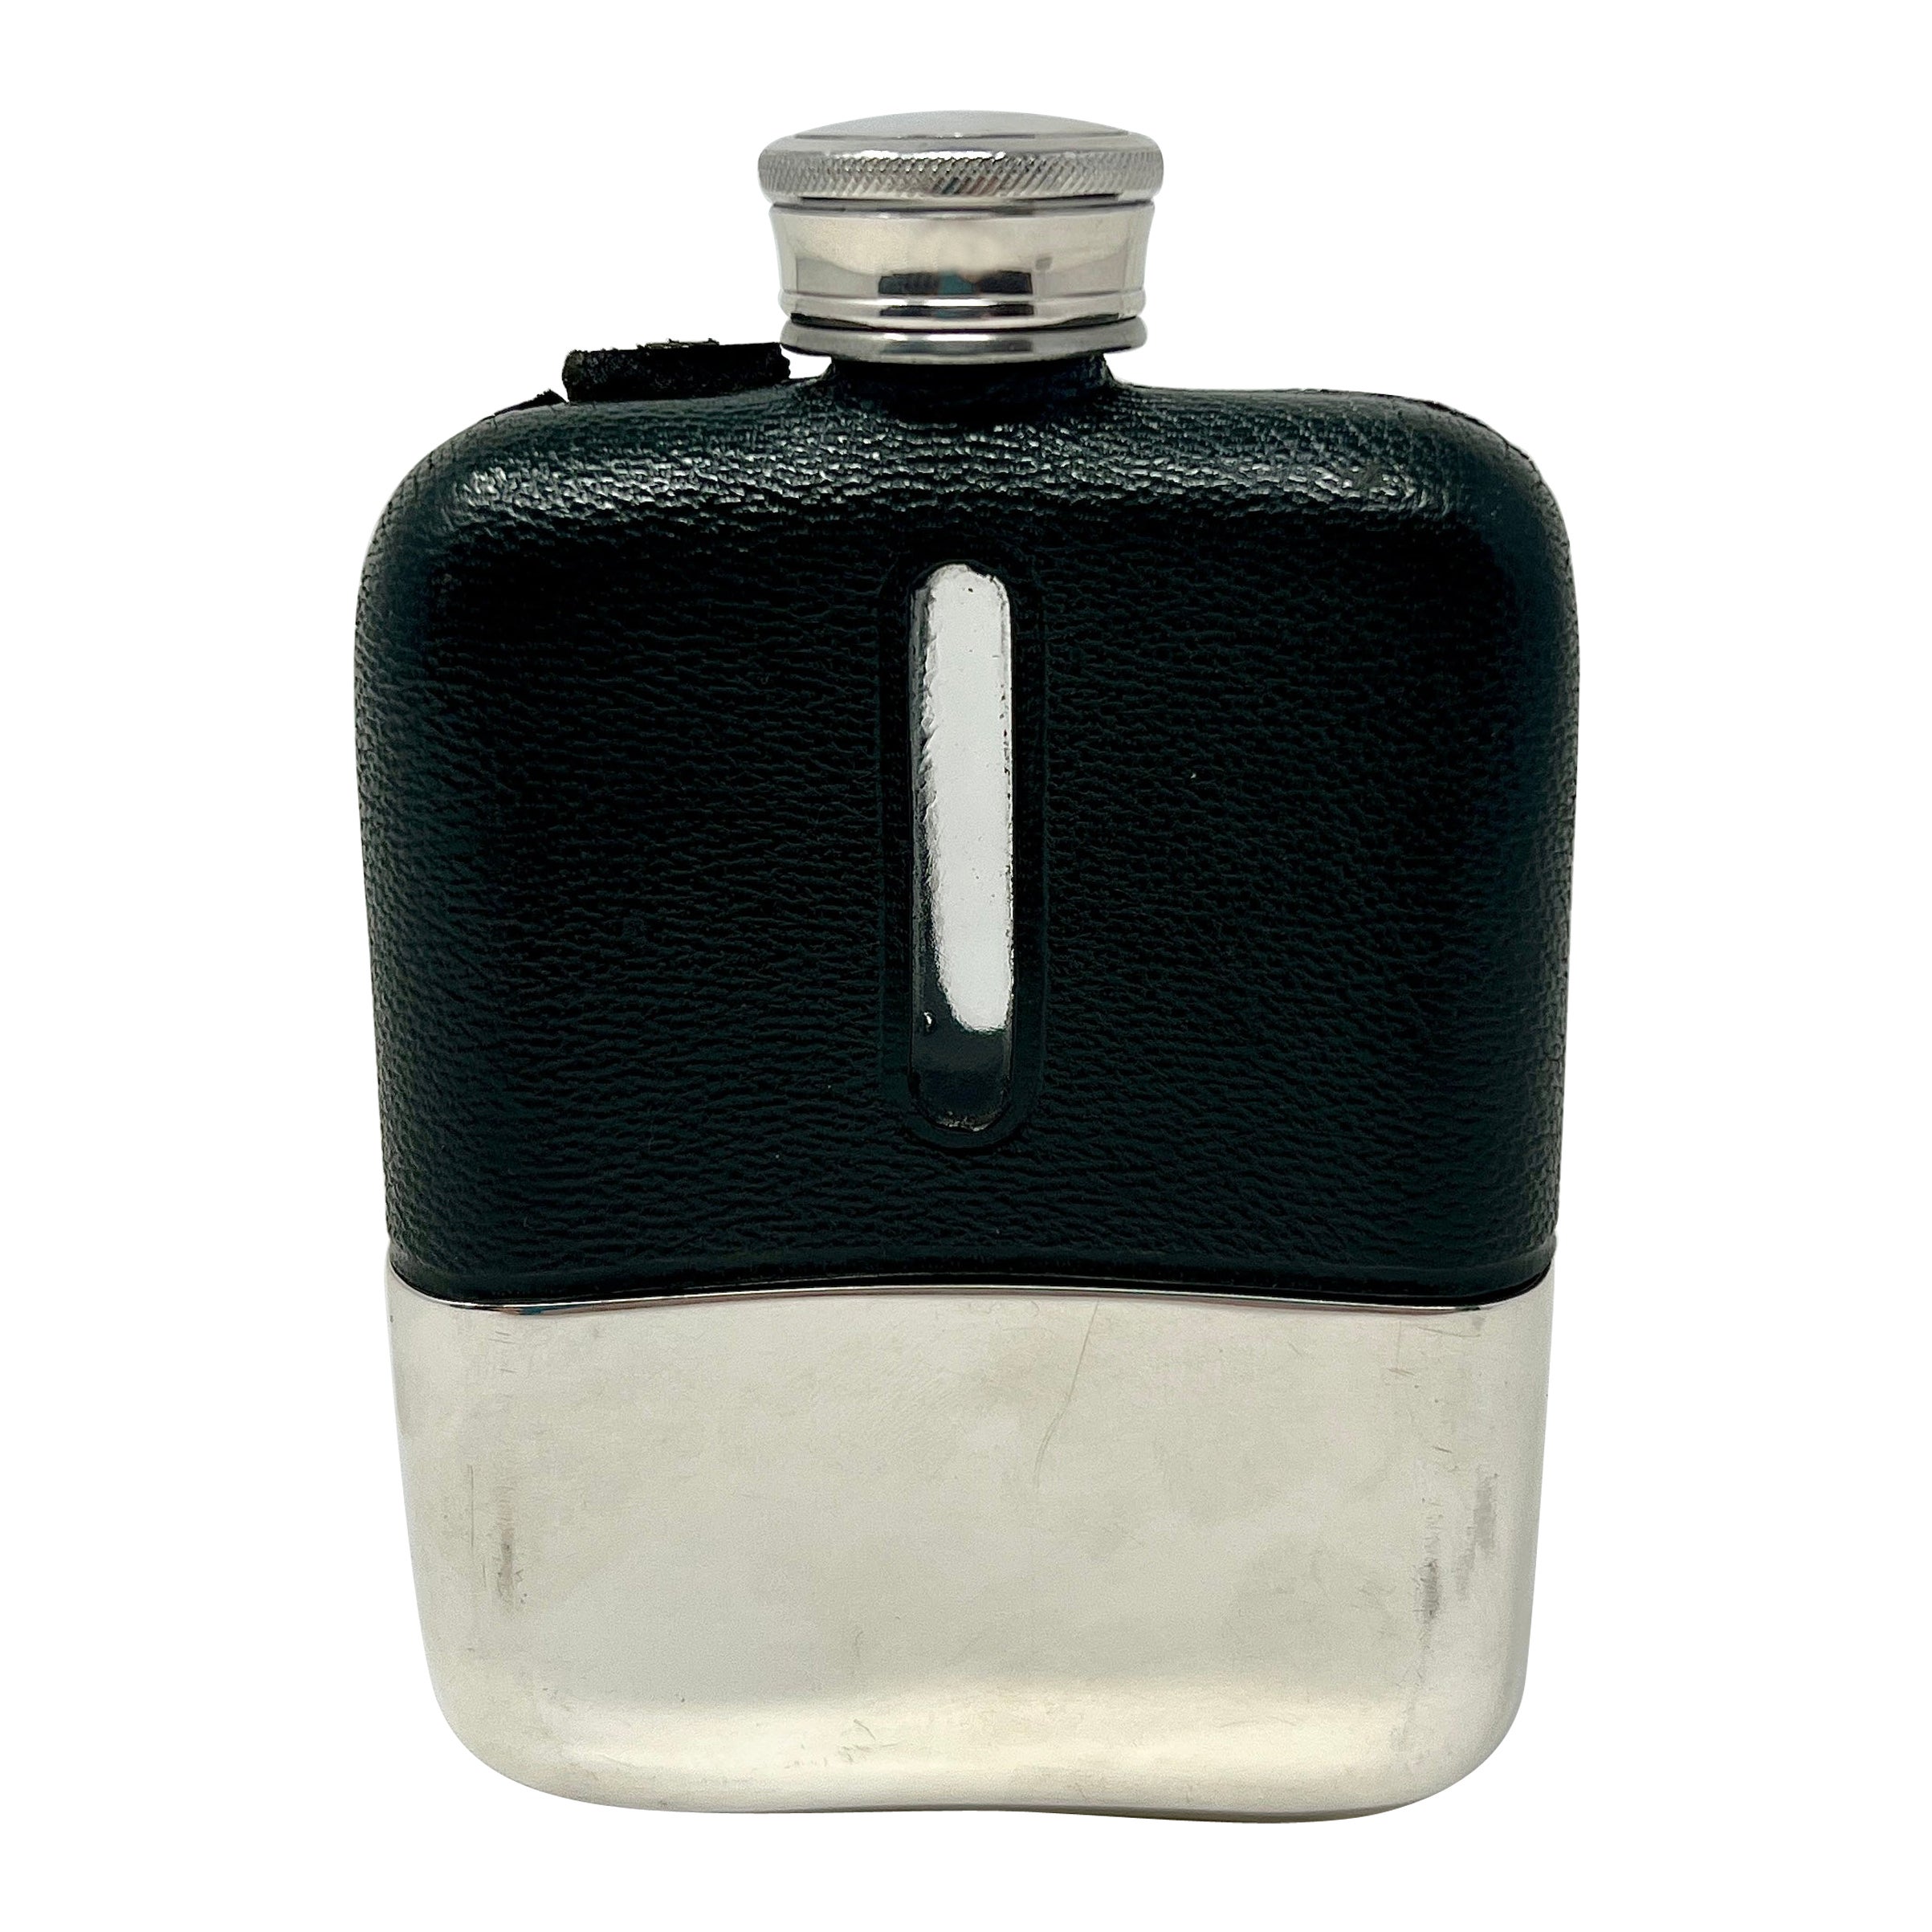 Antique American Art Deco Silver-Plate and Leather Drinking Flask, Circa 1920. For Sale